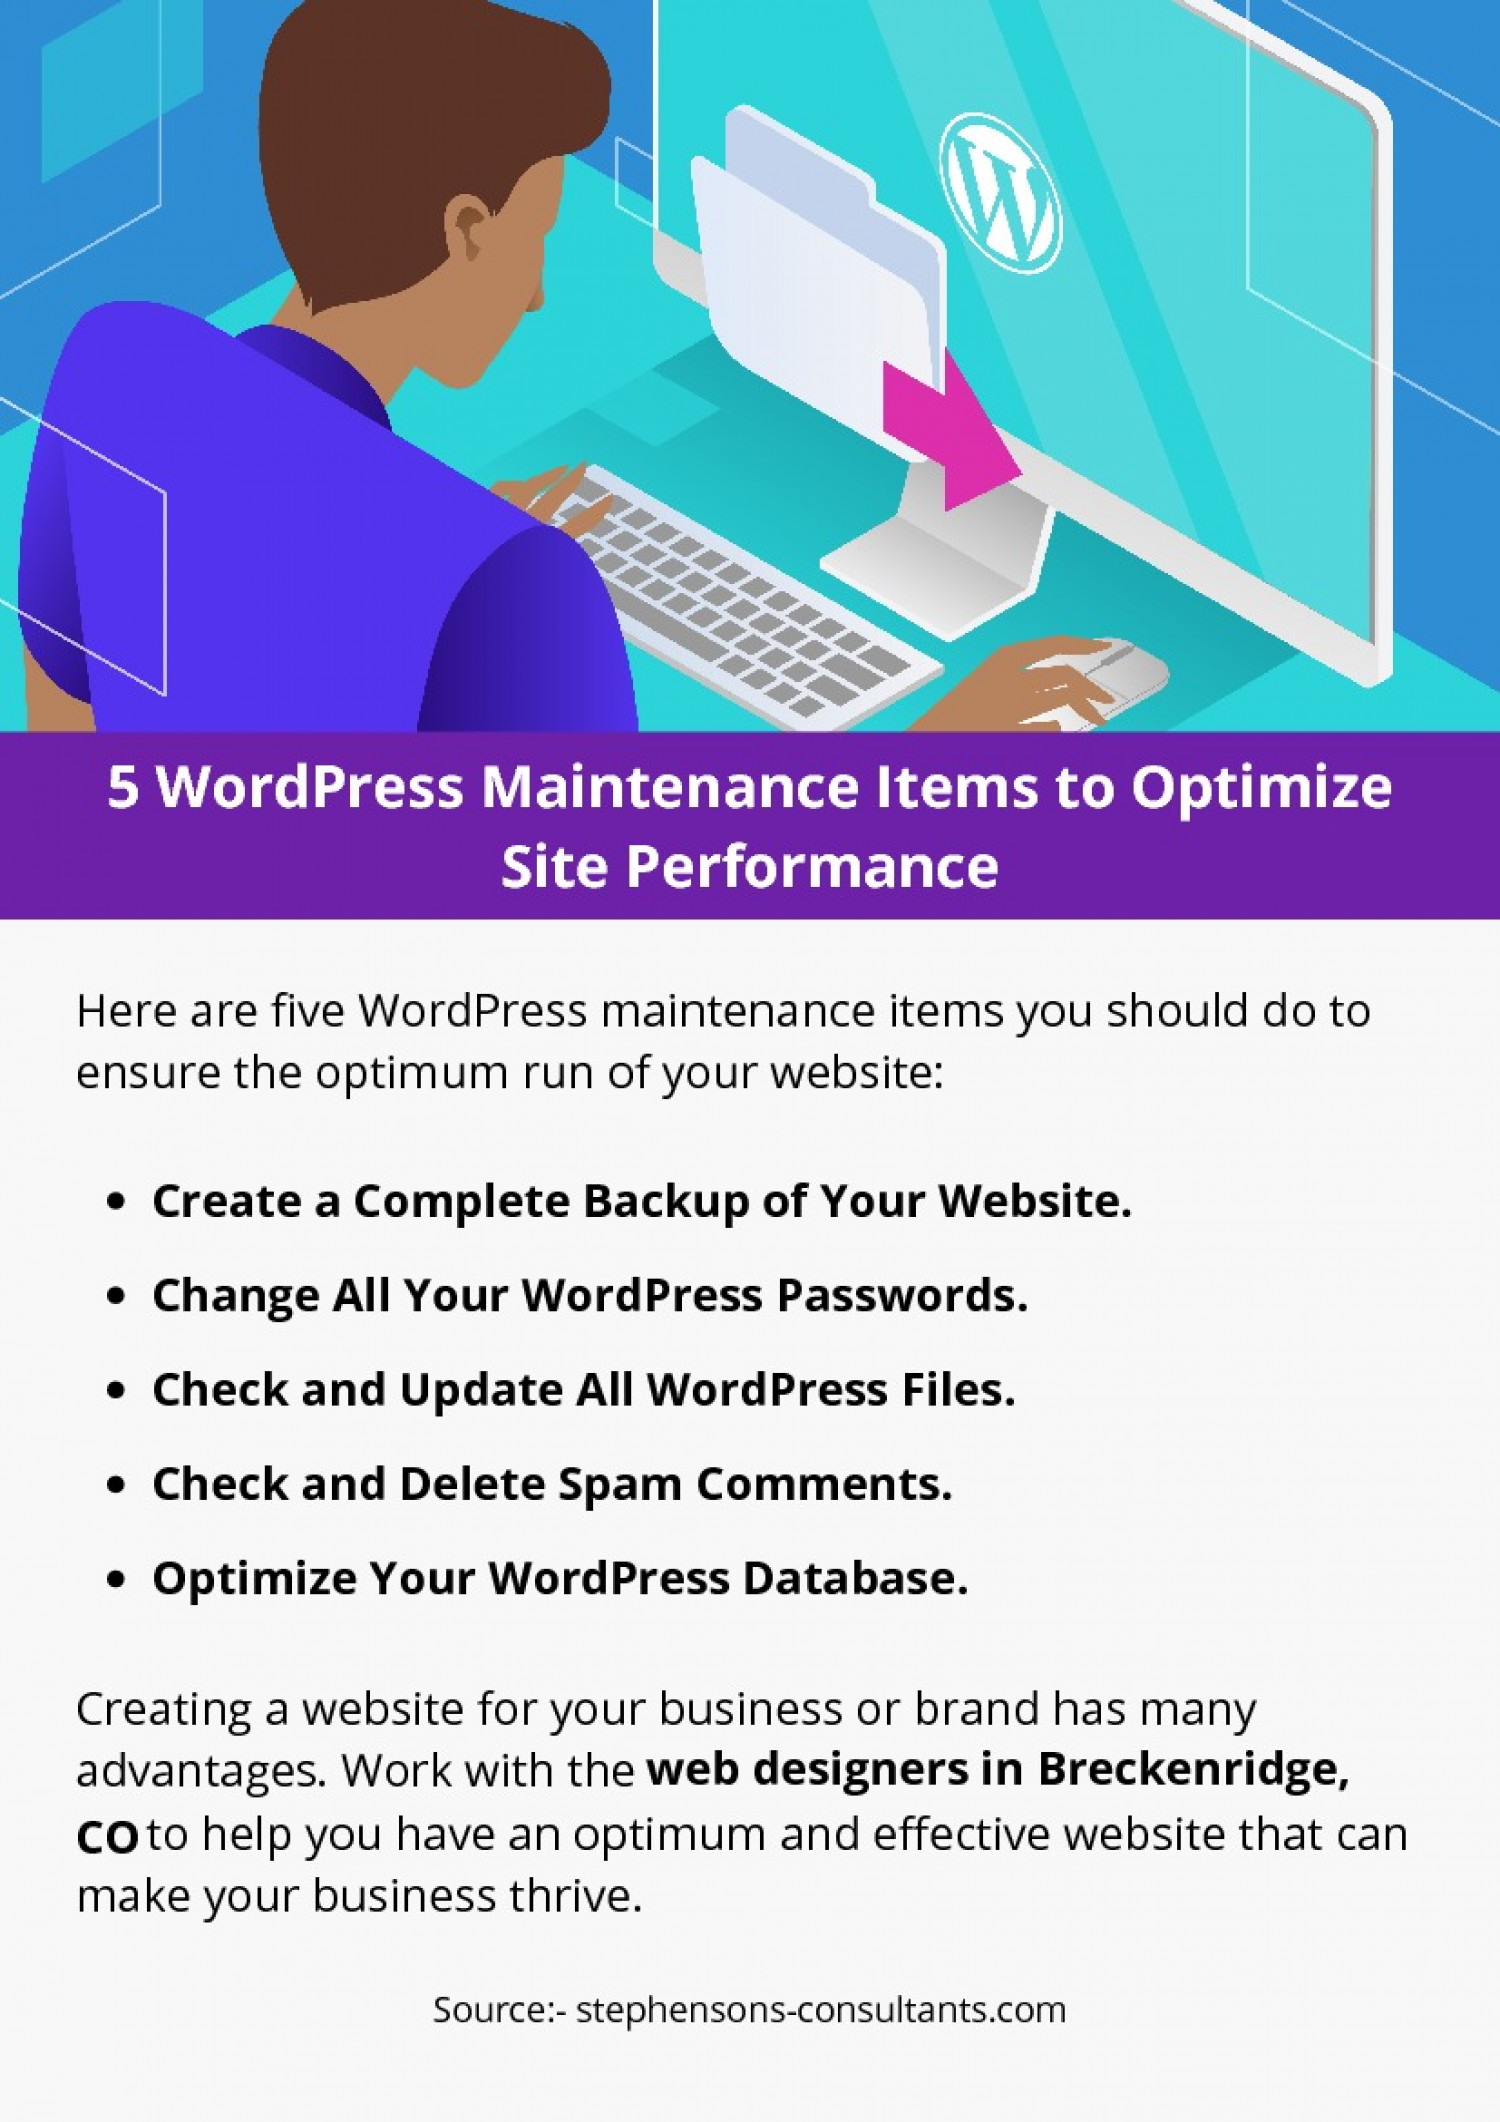 5 WordPress Maintenance Items to Optimize Site Performance Infographic